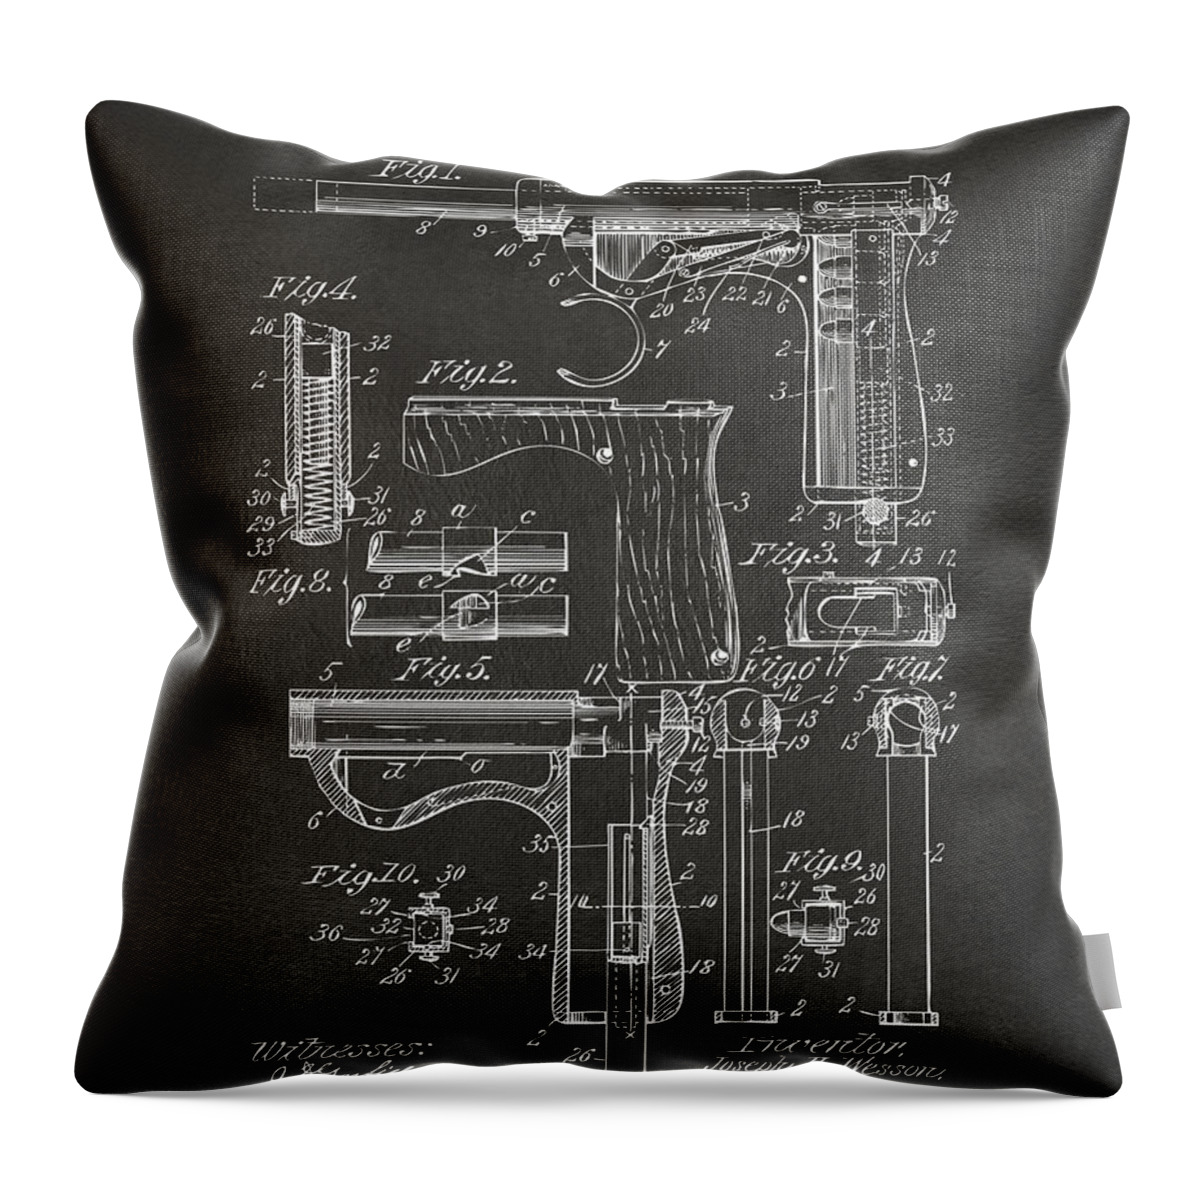 Wesson Pistol Throw Pillow featuring the digital art 1898 Wesson Magazine Pistol Patent Artwork - Gray by Nikki Marie Smith